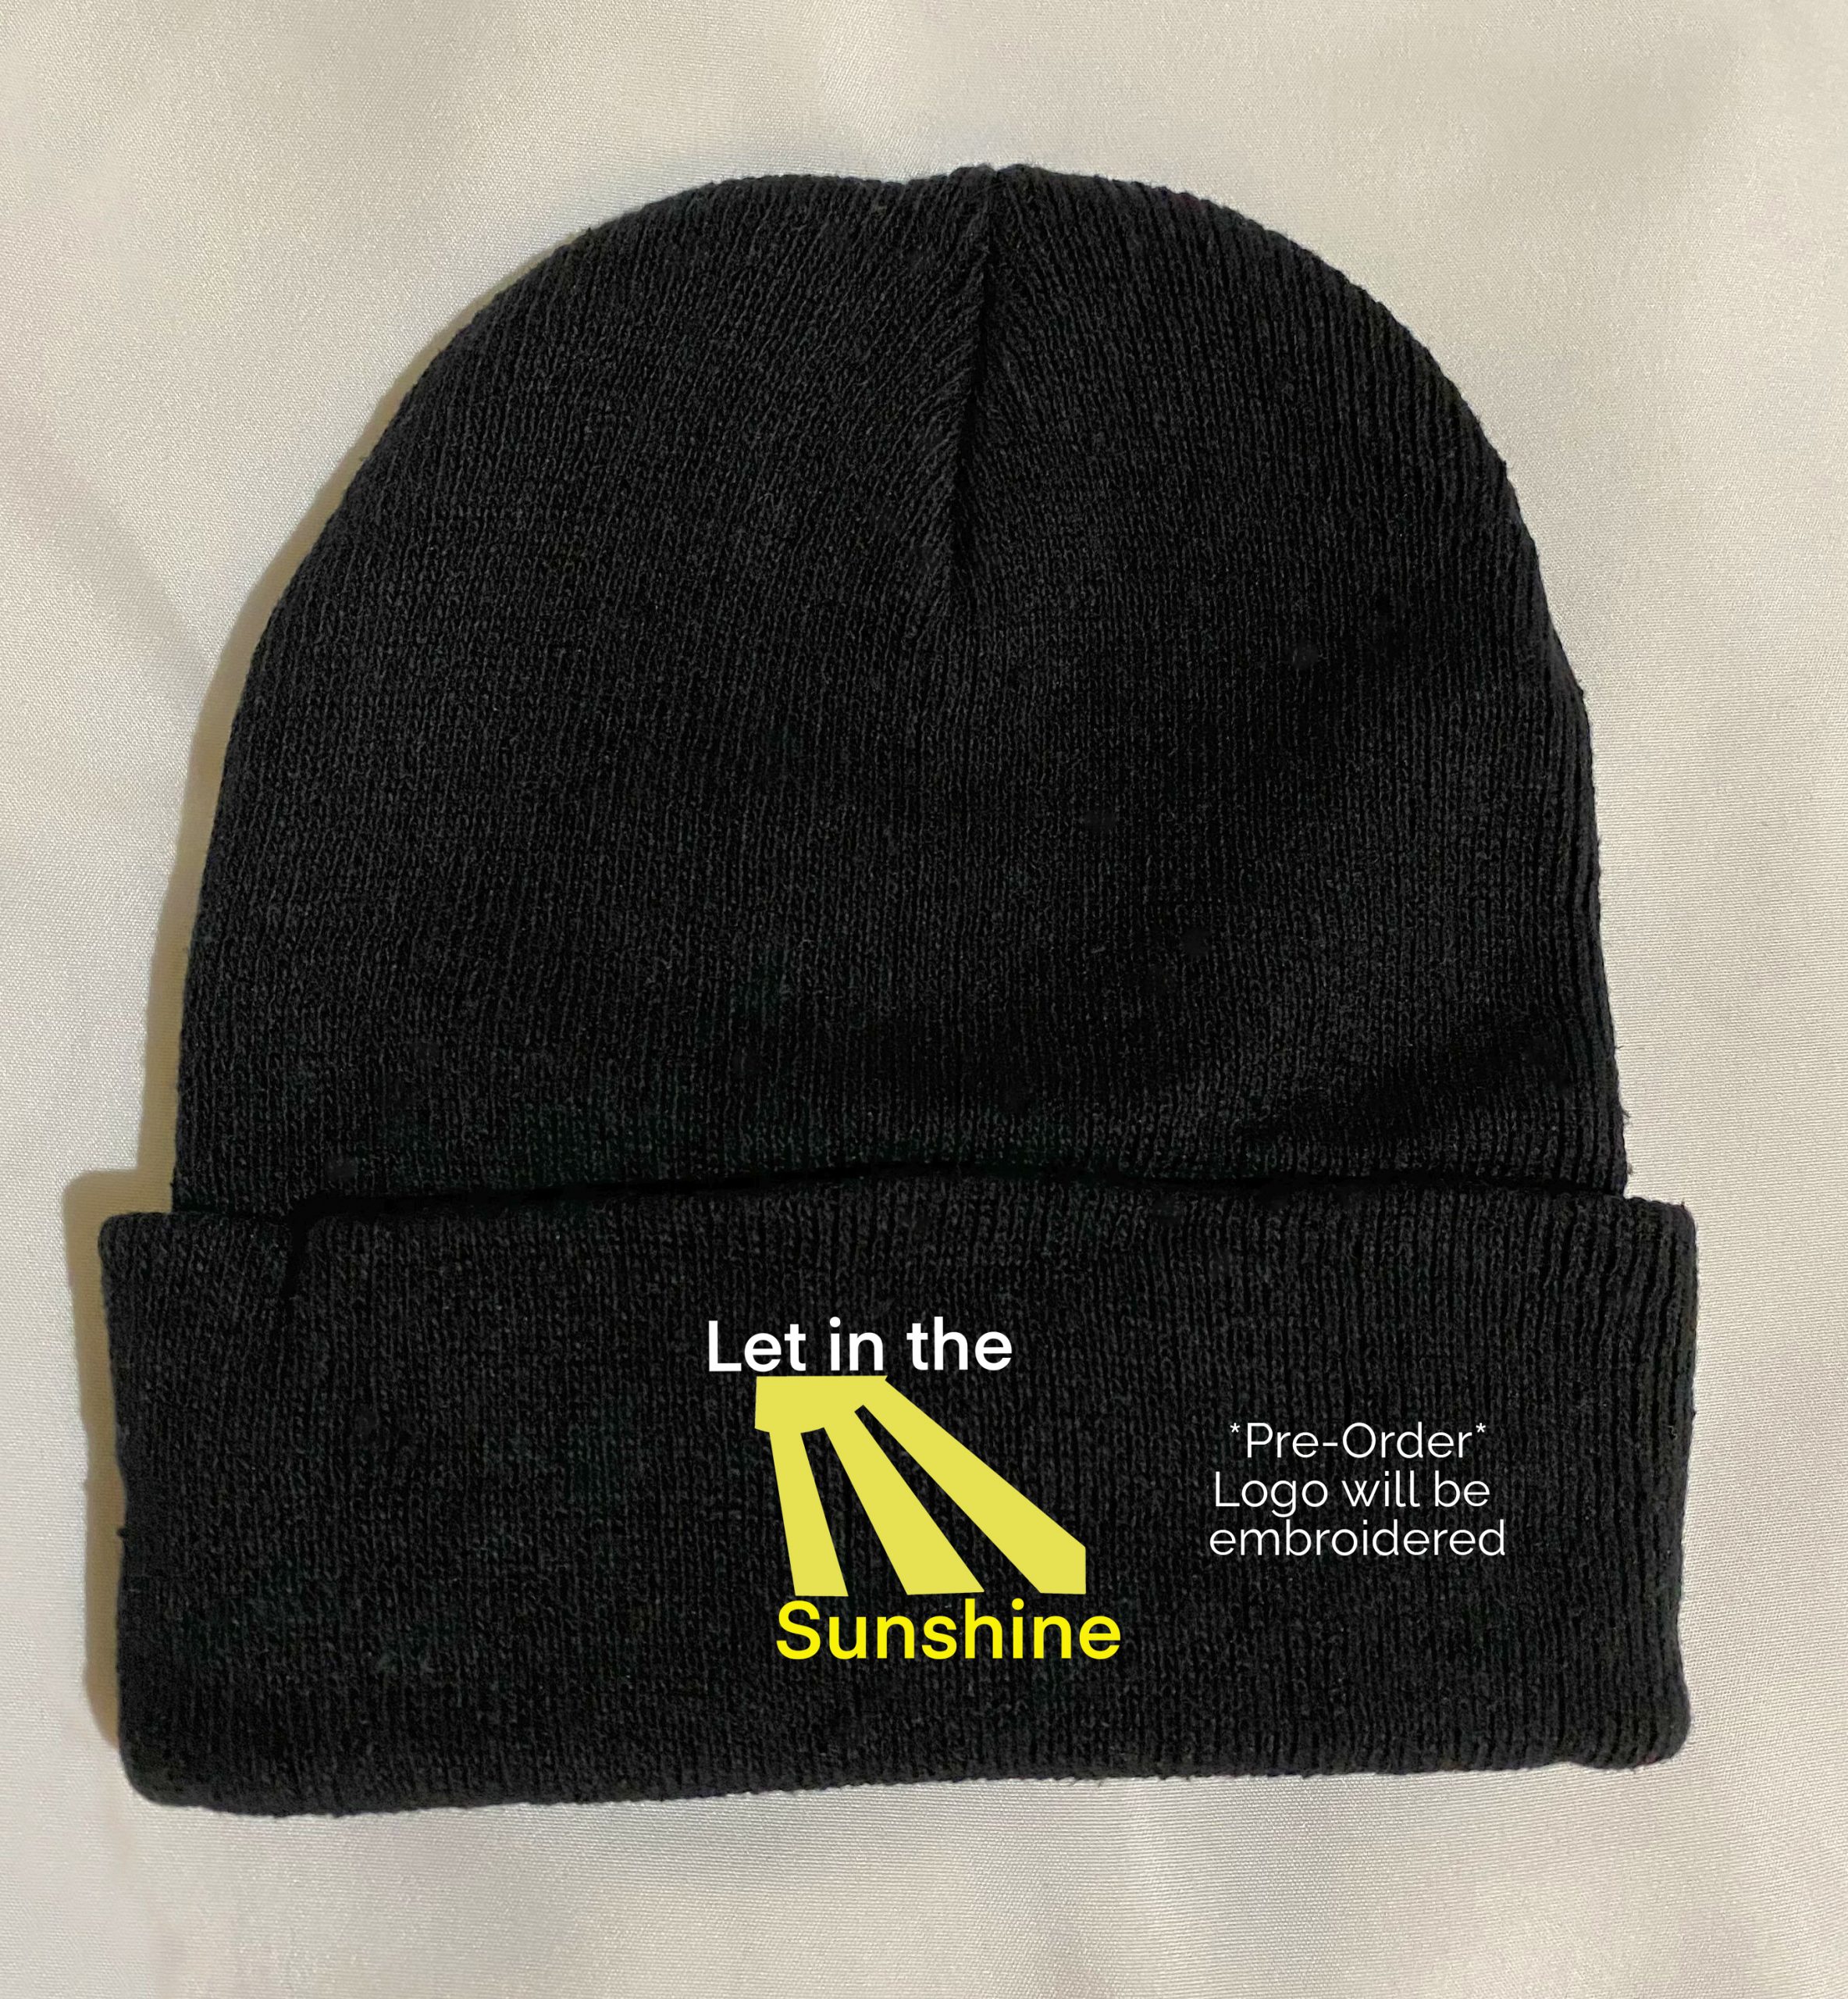 Let in the Sunshine Beanie